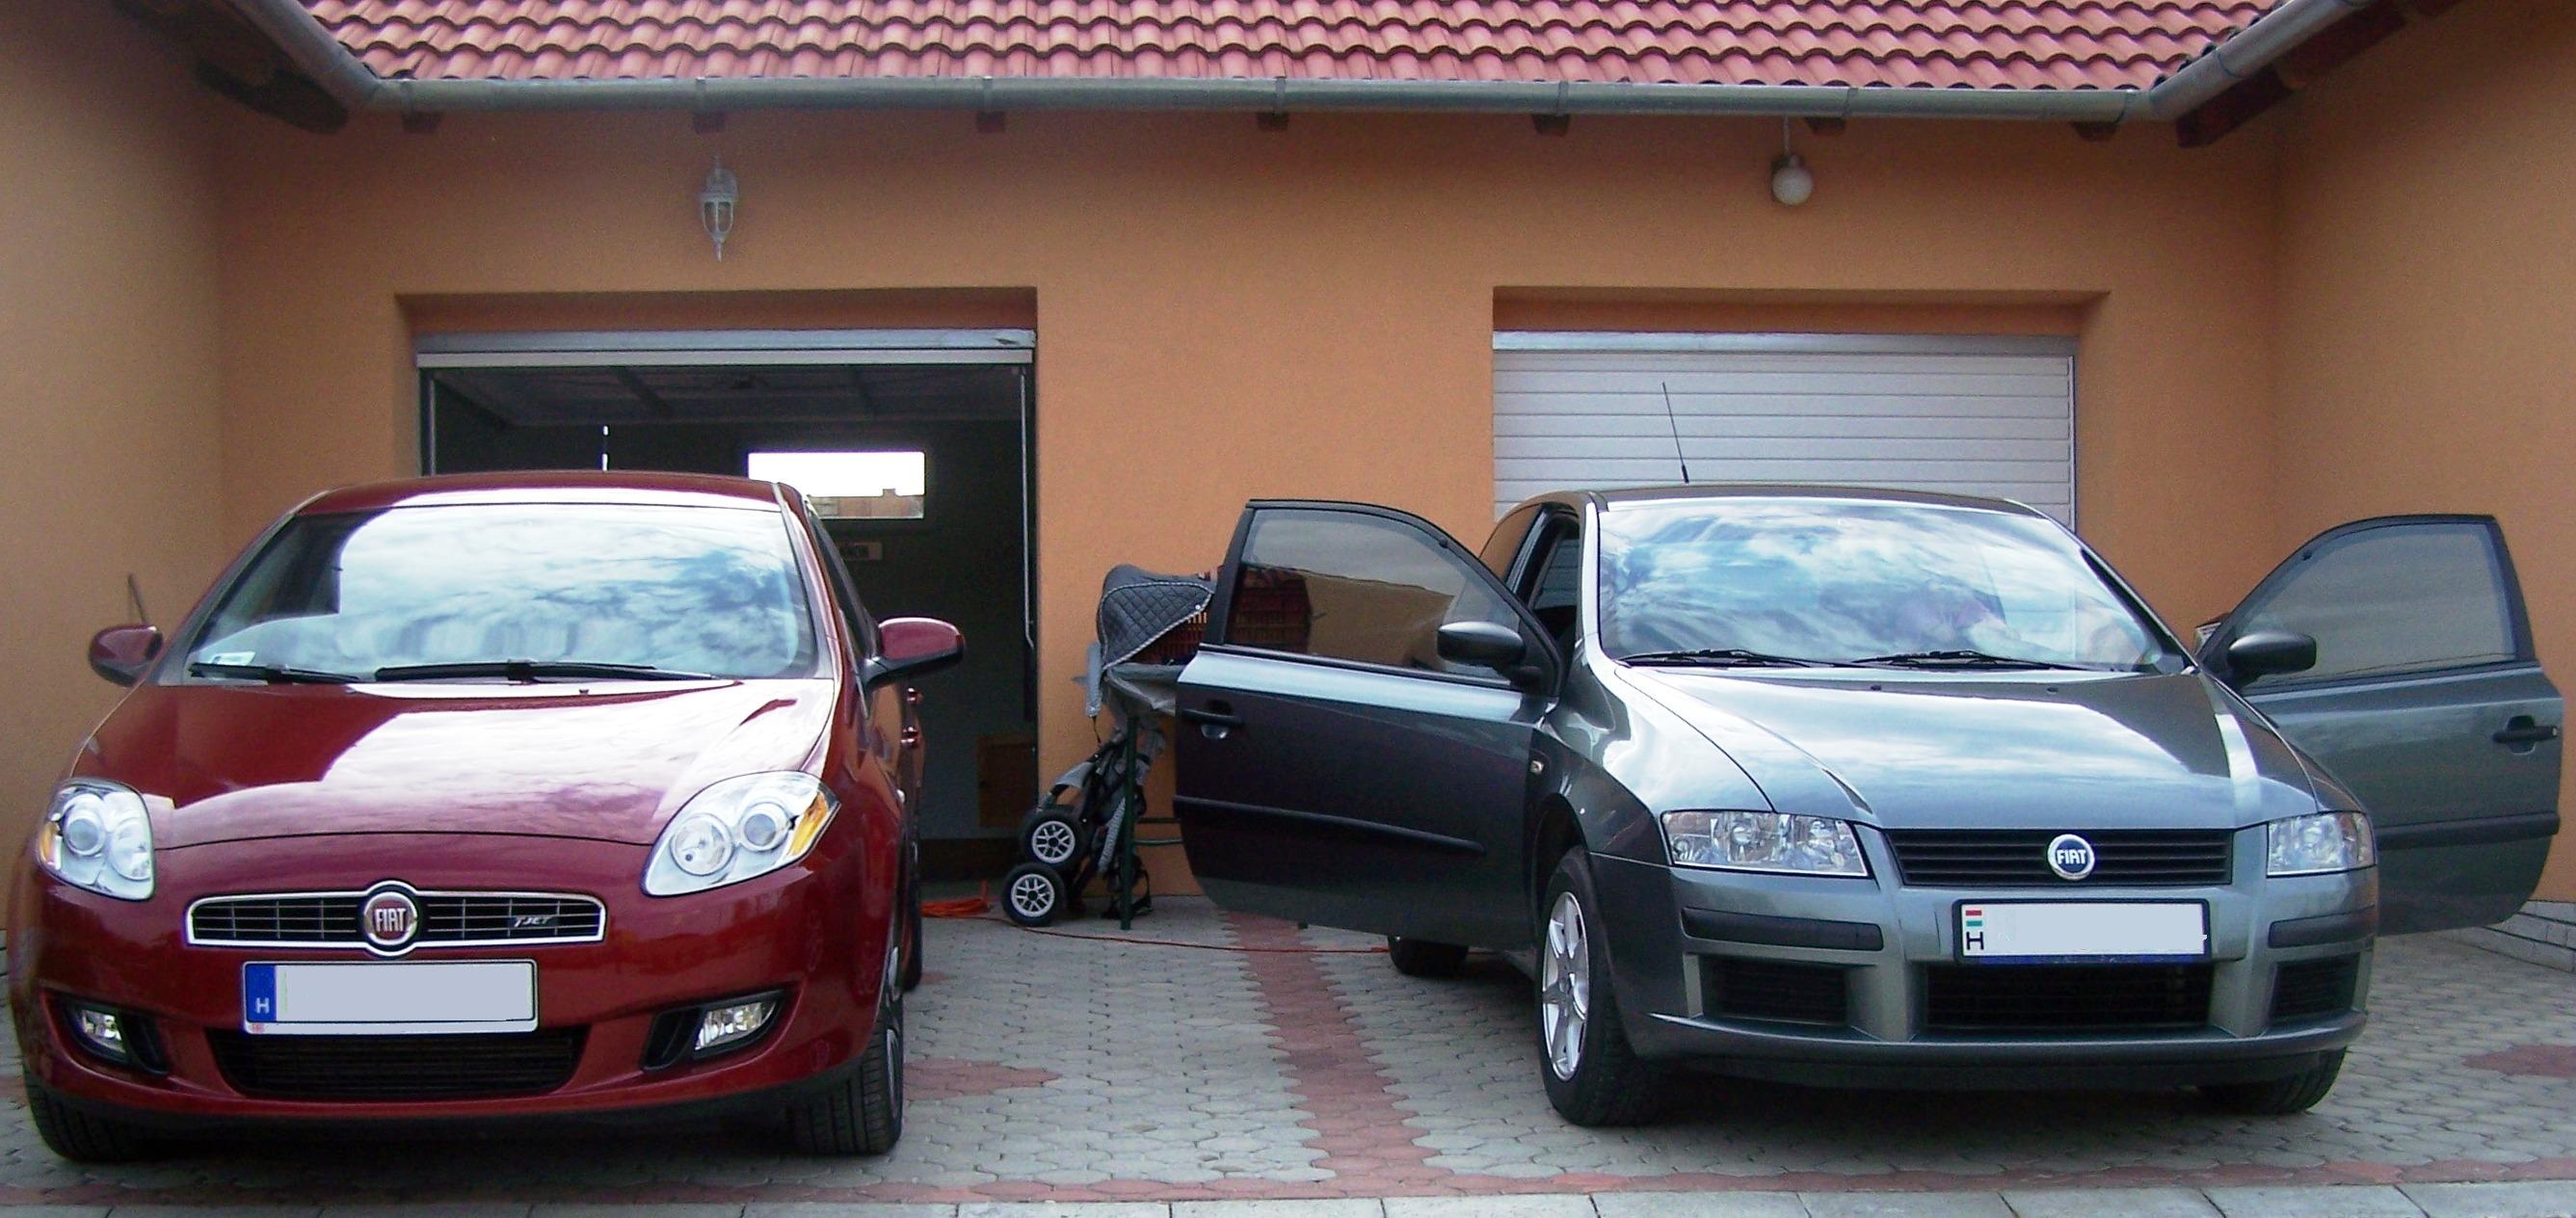 My loved cars